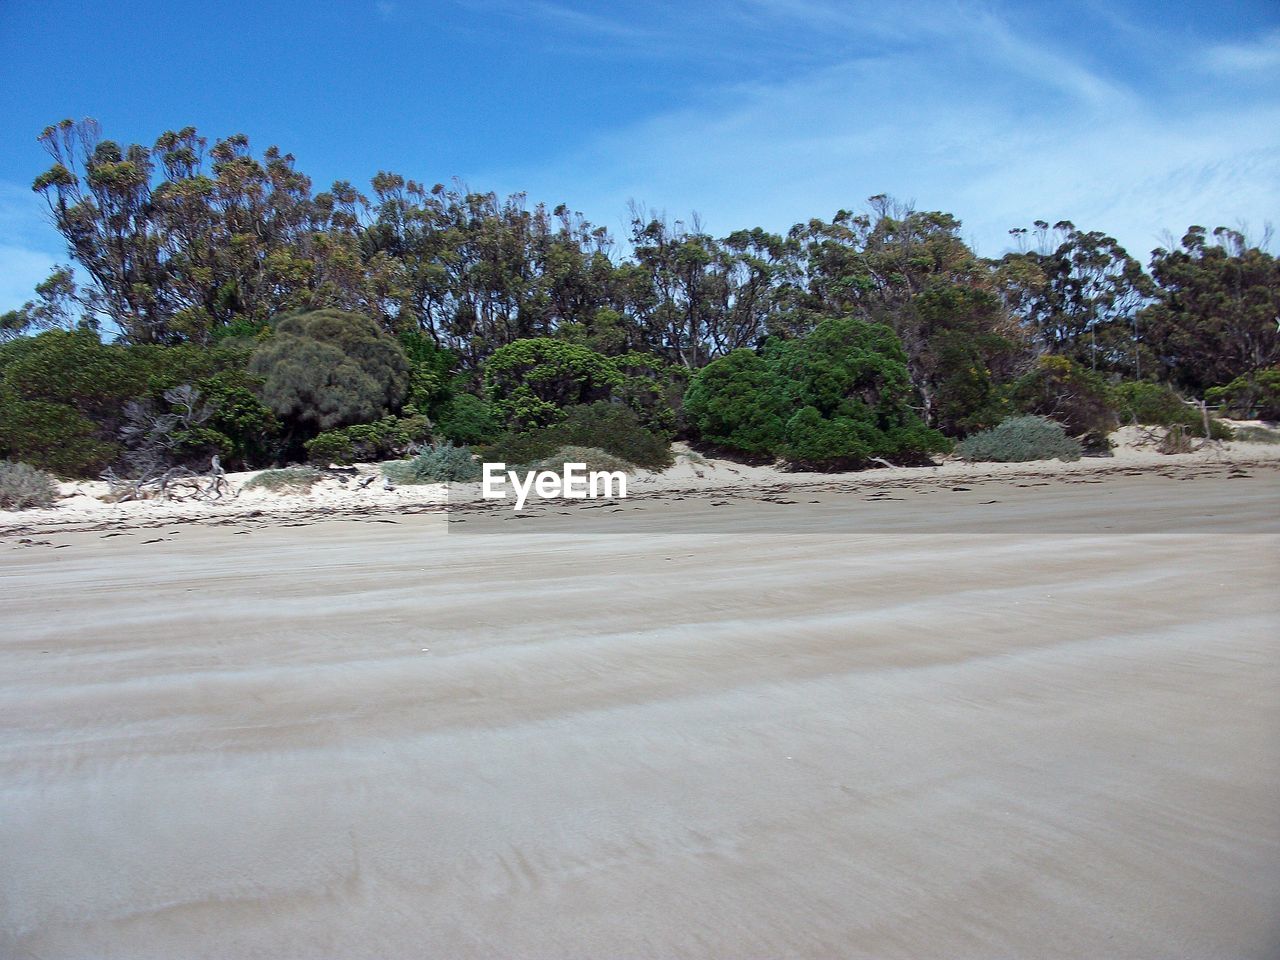 SCENIC VIEW OF TREES ON BEACH